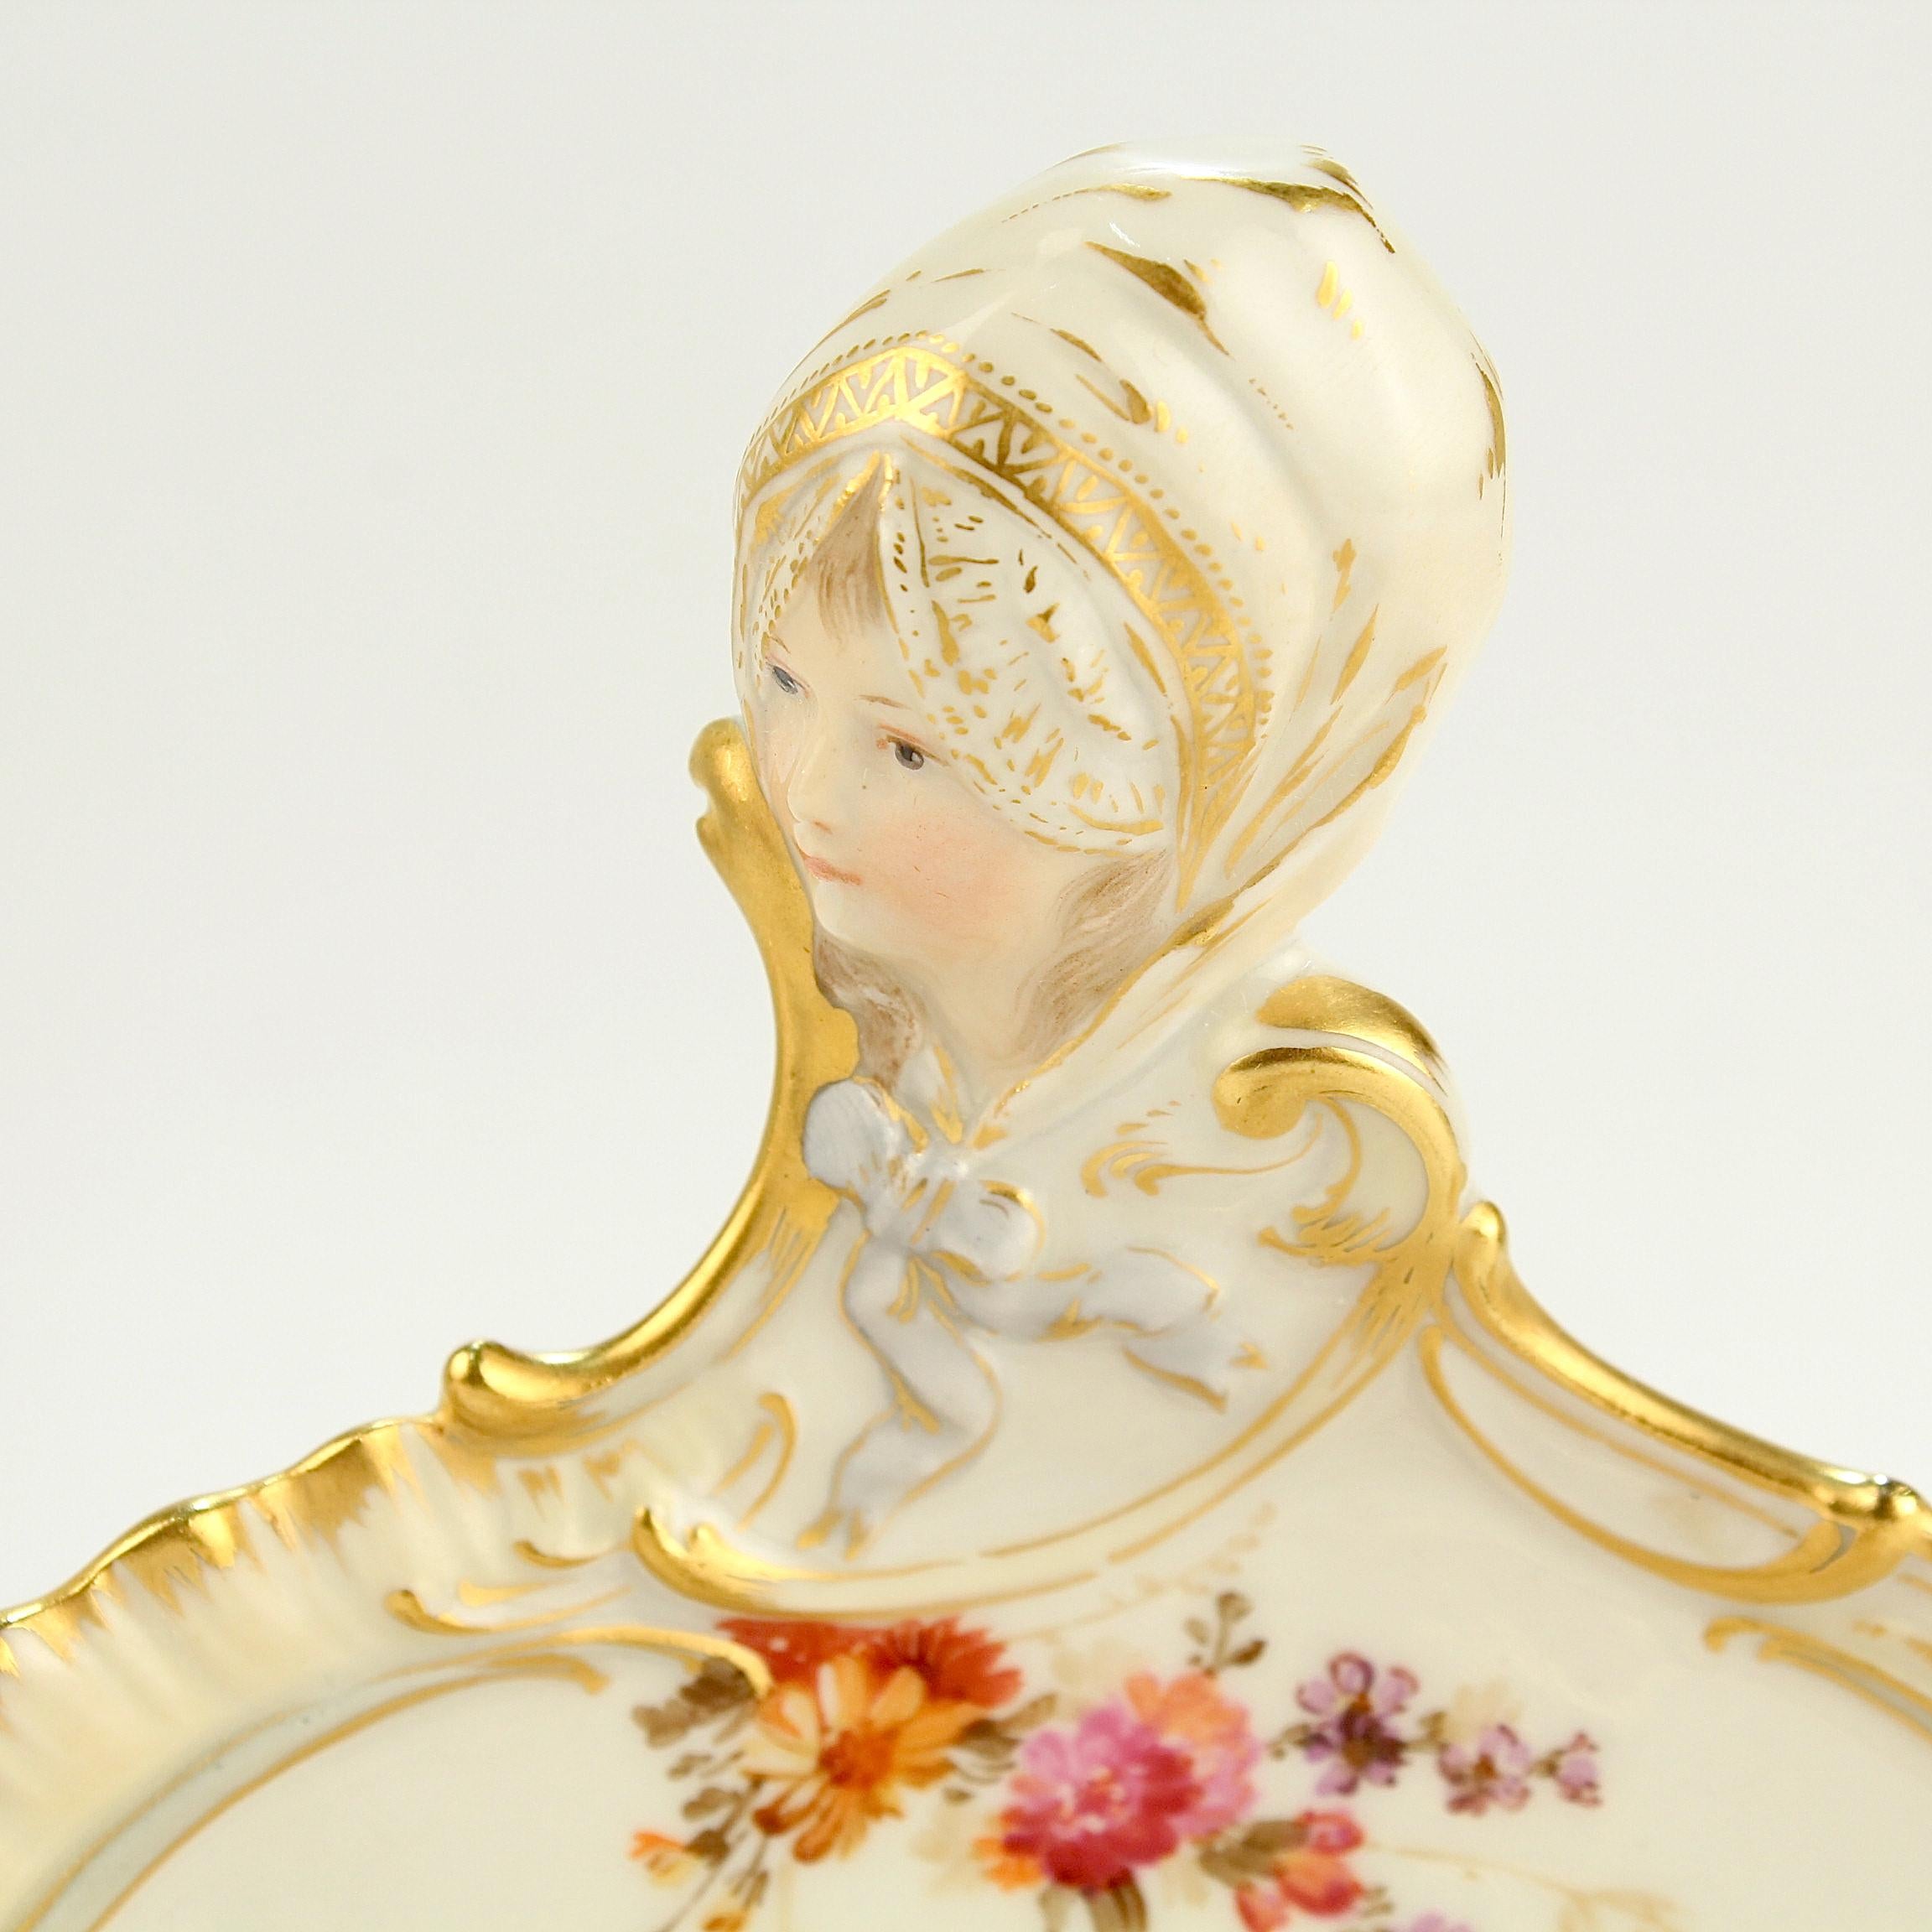 Antique KPM Royal Berlin Porcelain Chamberstick with a Maiden's Head Handle For Sale 4